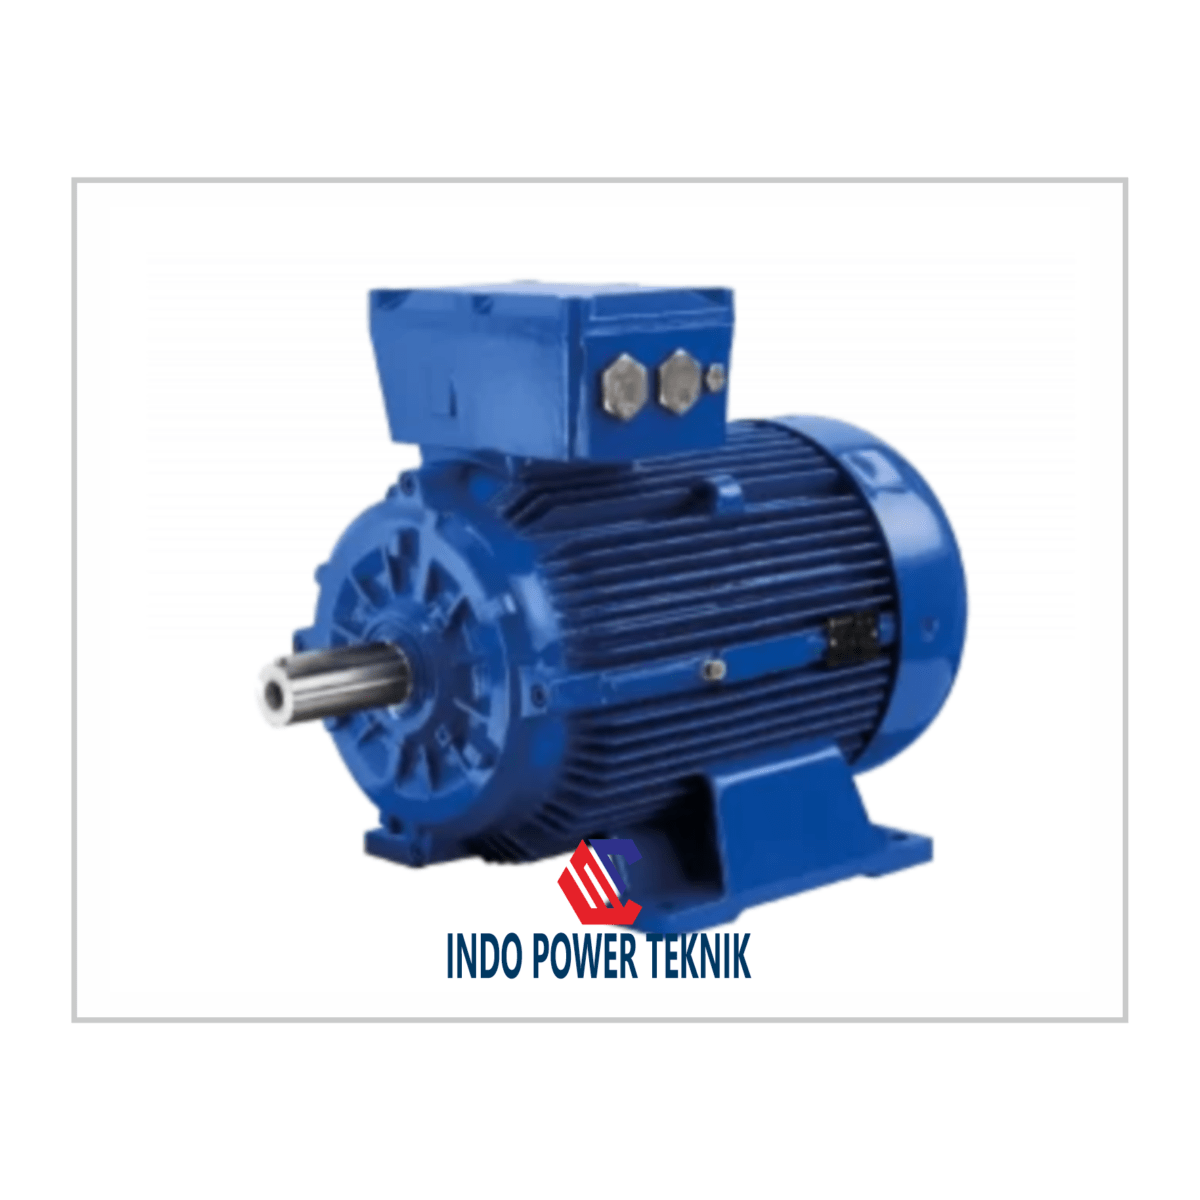 INDO POWER TEKNIK marelli-exproof MARELLI EXPLOSION PROOF ALL CATEGORIES ELECTRIC MOTOR  motor explosion proof semarang motor explosion proof marelli motor explosion proof jawa tengah motor explosion proof jakarta motor explosion proof merk marelli motori marelli motori explosion proof motor marelli motori explosion proof moor marelli motor explosion proof di yogyakarta marelli motor explosion proof di sumatra utara marelli motor explosion proof di sumatra selatan marelli motor explosion proof di sumatra barat marelli motor explosion proof di sulawesi utara marelli motor explosion proof di sulawesi barat marelli motor explosion proof di riau marelli motor explosion proof di papua tengah marelli motor explosion proof di papua selatan marelli motor explosion proof di papua barat marelli motor explosion proof di papua marelli motor explosion proof di nusa tenggara timur marelli motor explosion proof di nusa tenggara barat marelli motor explosion proof di maluku utara marelli motor explosion proof di lampung marelli motor explosion proof di kepulauan riau marelli motor explosion proof di kepulauan bangka belitung marelli motor explosion proof di kalimantan utara marelli motor explosion proof di kalimantan timur marelli motor explosion proof di kalimantan tengah marelli motor explosion proof di kalimantan selatan marelli motor explosion proof di kalimantan barat marelli motor explosion proof di jawa timur marelli motor explosion proof di jawa tengah marelli motor explosion proof di jawa barat marelli motor explosion proof di jambi marelli motor explosion proof di jakarta marelli motor explosion proof di gorontalo marelli motor explosion proof di bengkulu marelli motor explosion proof di banten marelli motor explosion proof di bali marelli motor explosion proof di aceh marelli motor explosion proof explosion proof motor merk marelli explosion proof motor explosion proof electric motor distributor motor explosion proof agen motor explosion proof 